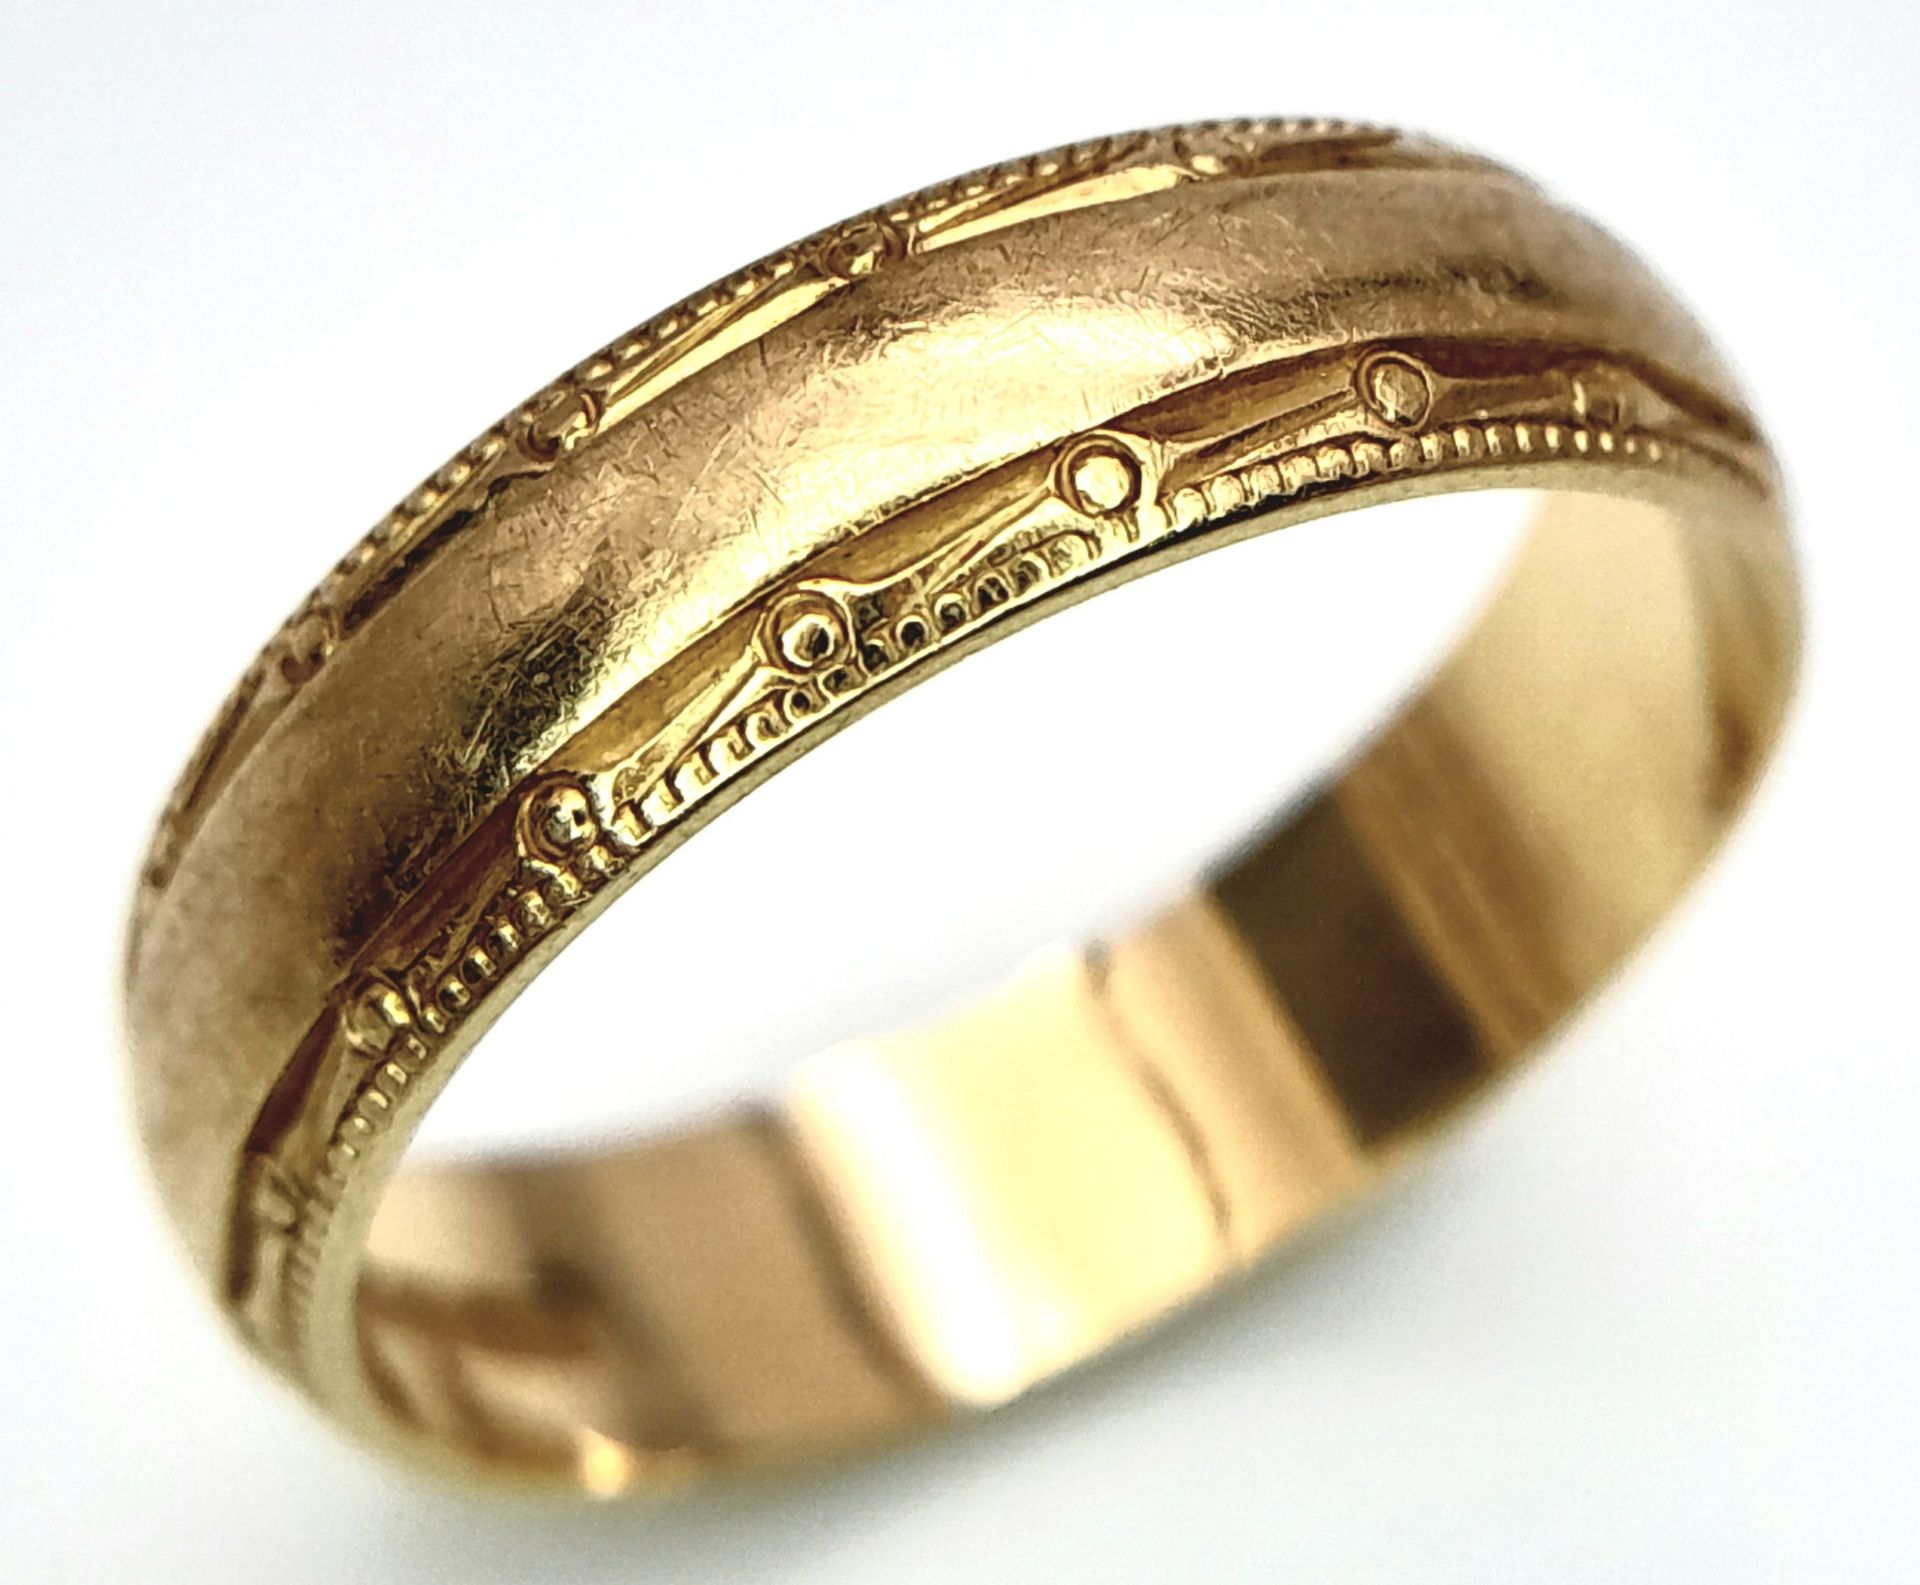 An 18 K yellow gold band ring with engraved rims. Size: M, weight: 3.5 g. - Image 3 of 5